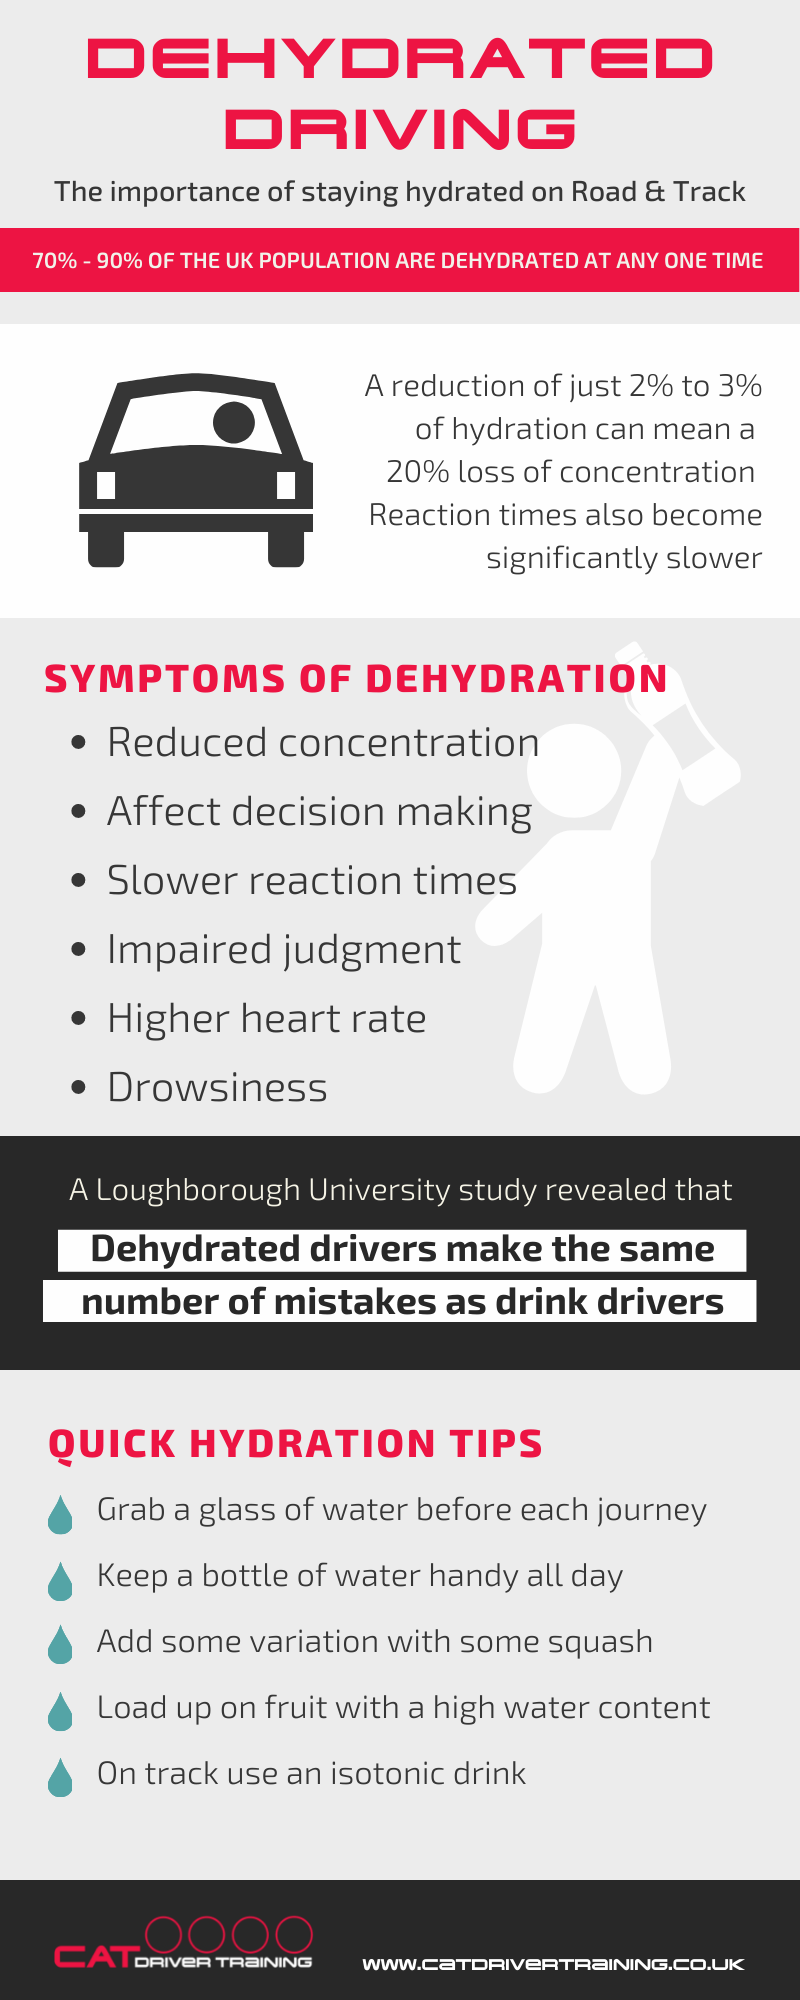 dehydrated driving graphic